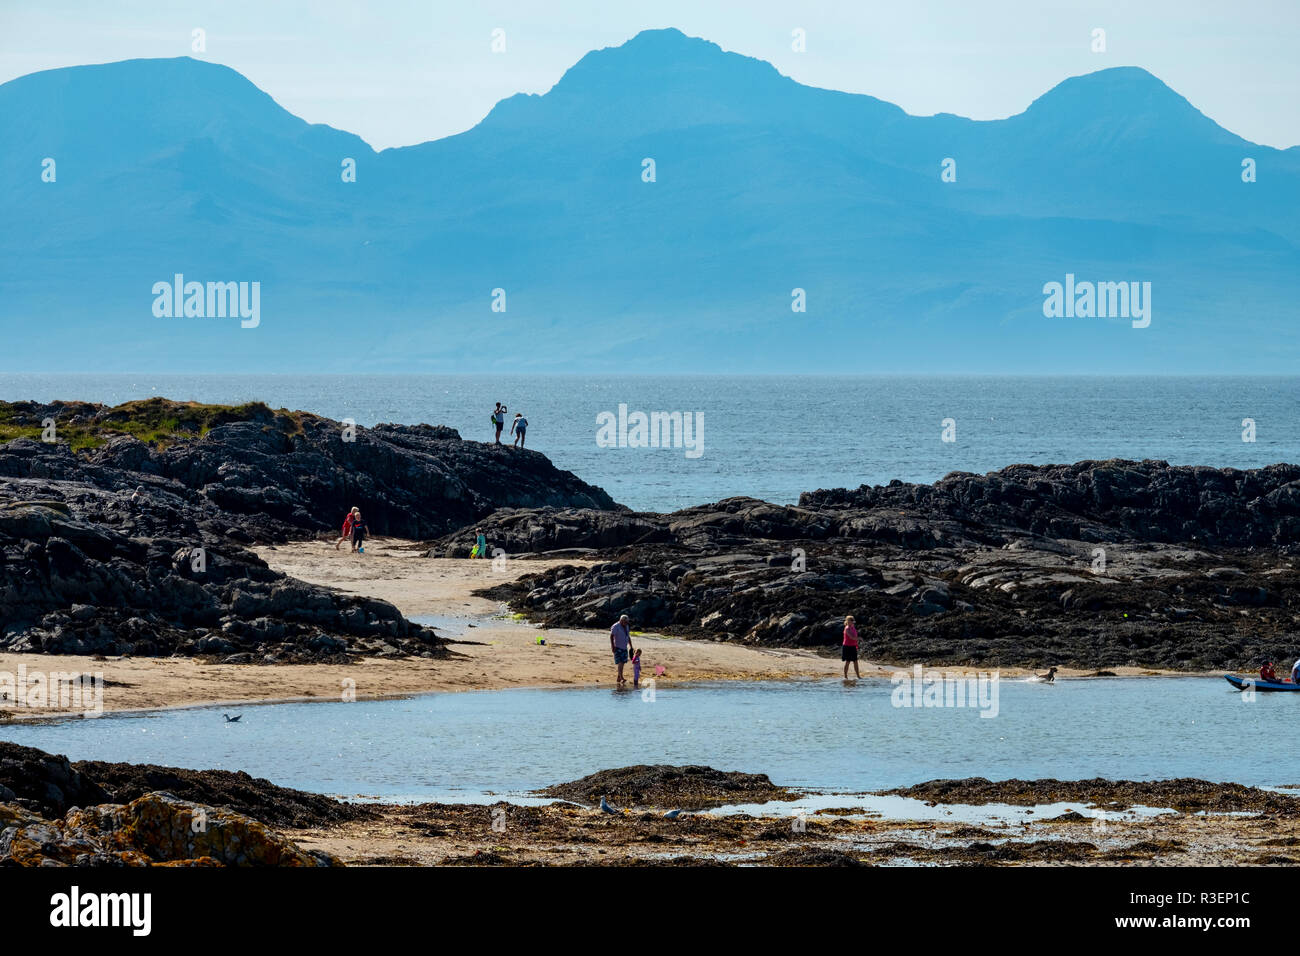 A sandy beach at Traigh near Arisaig with the island Rum in the distance. Stock Photo